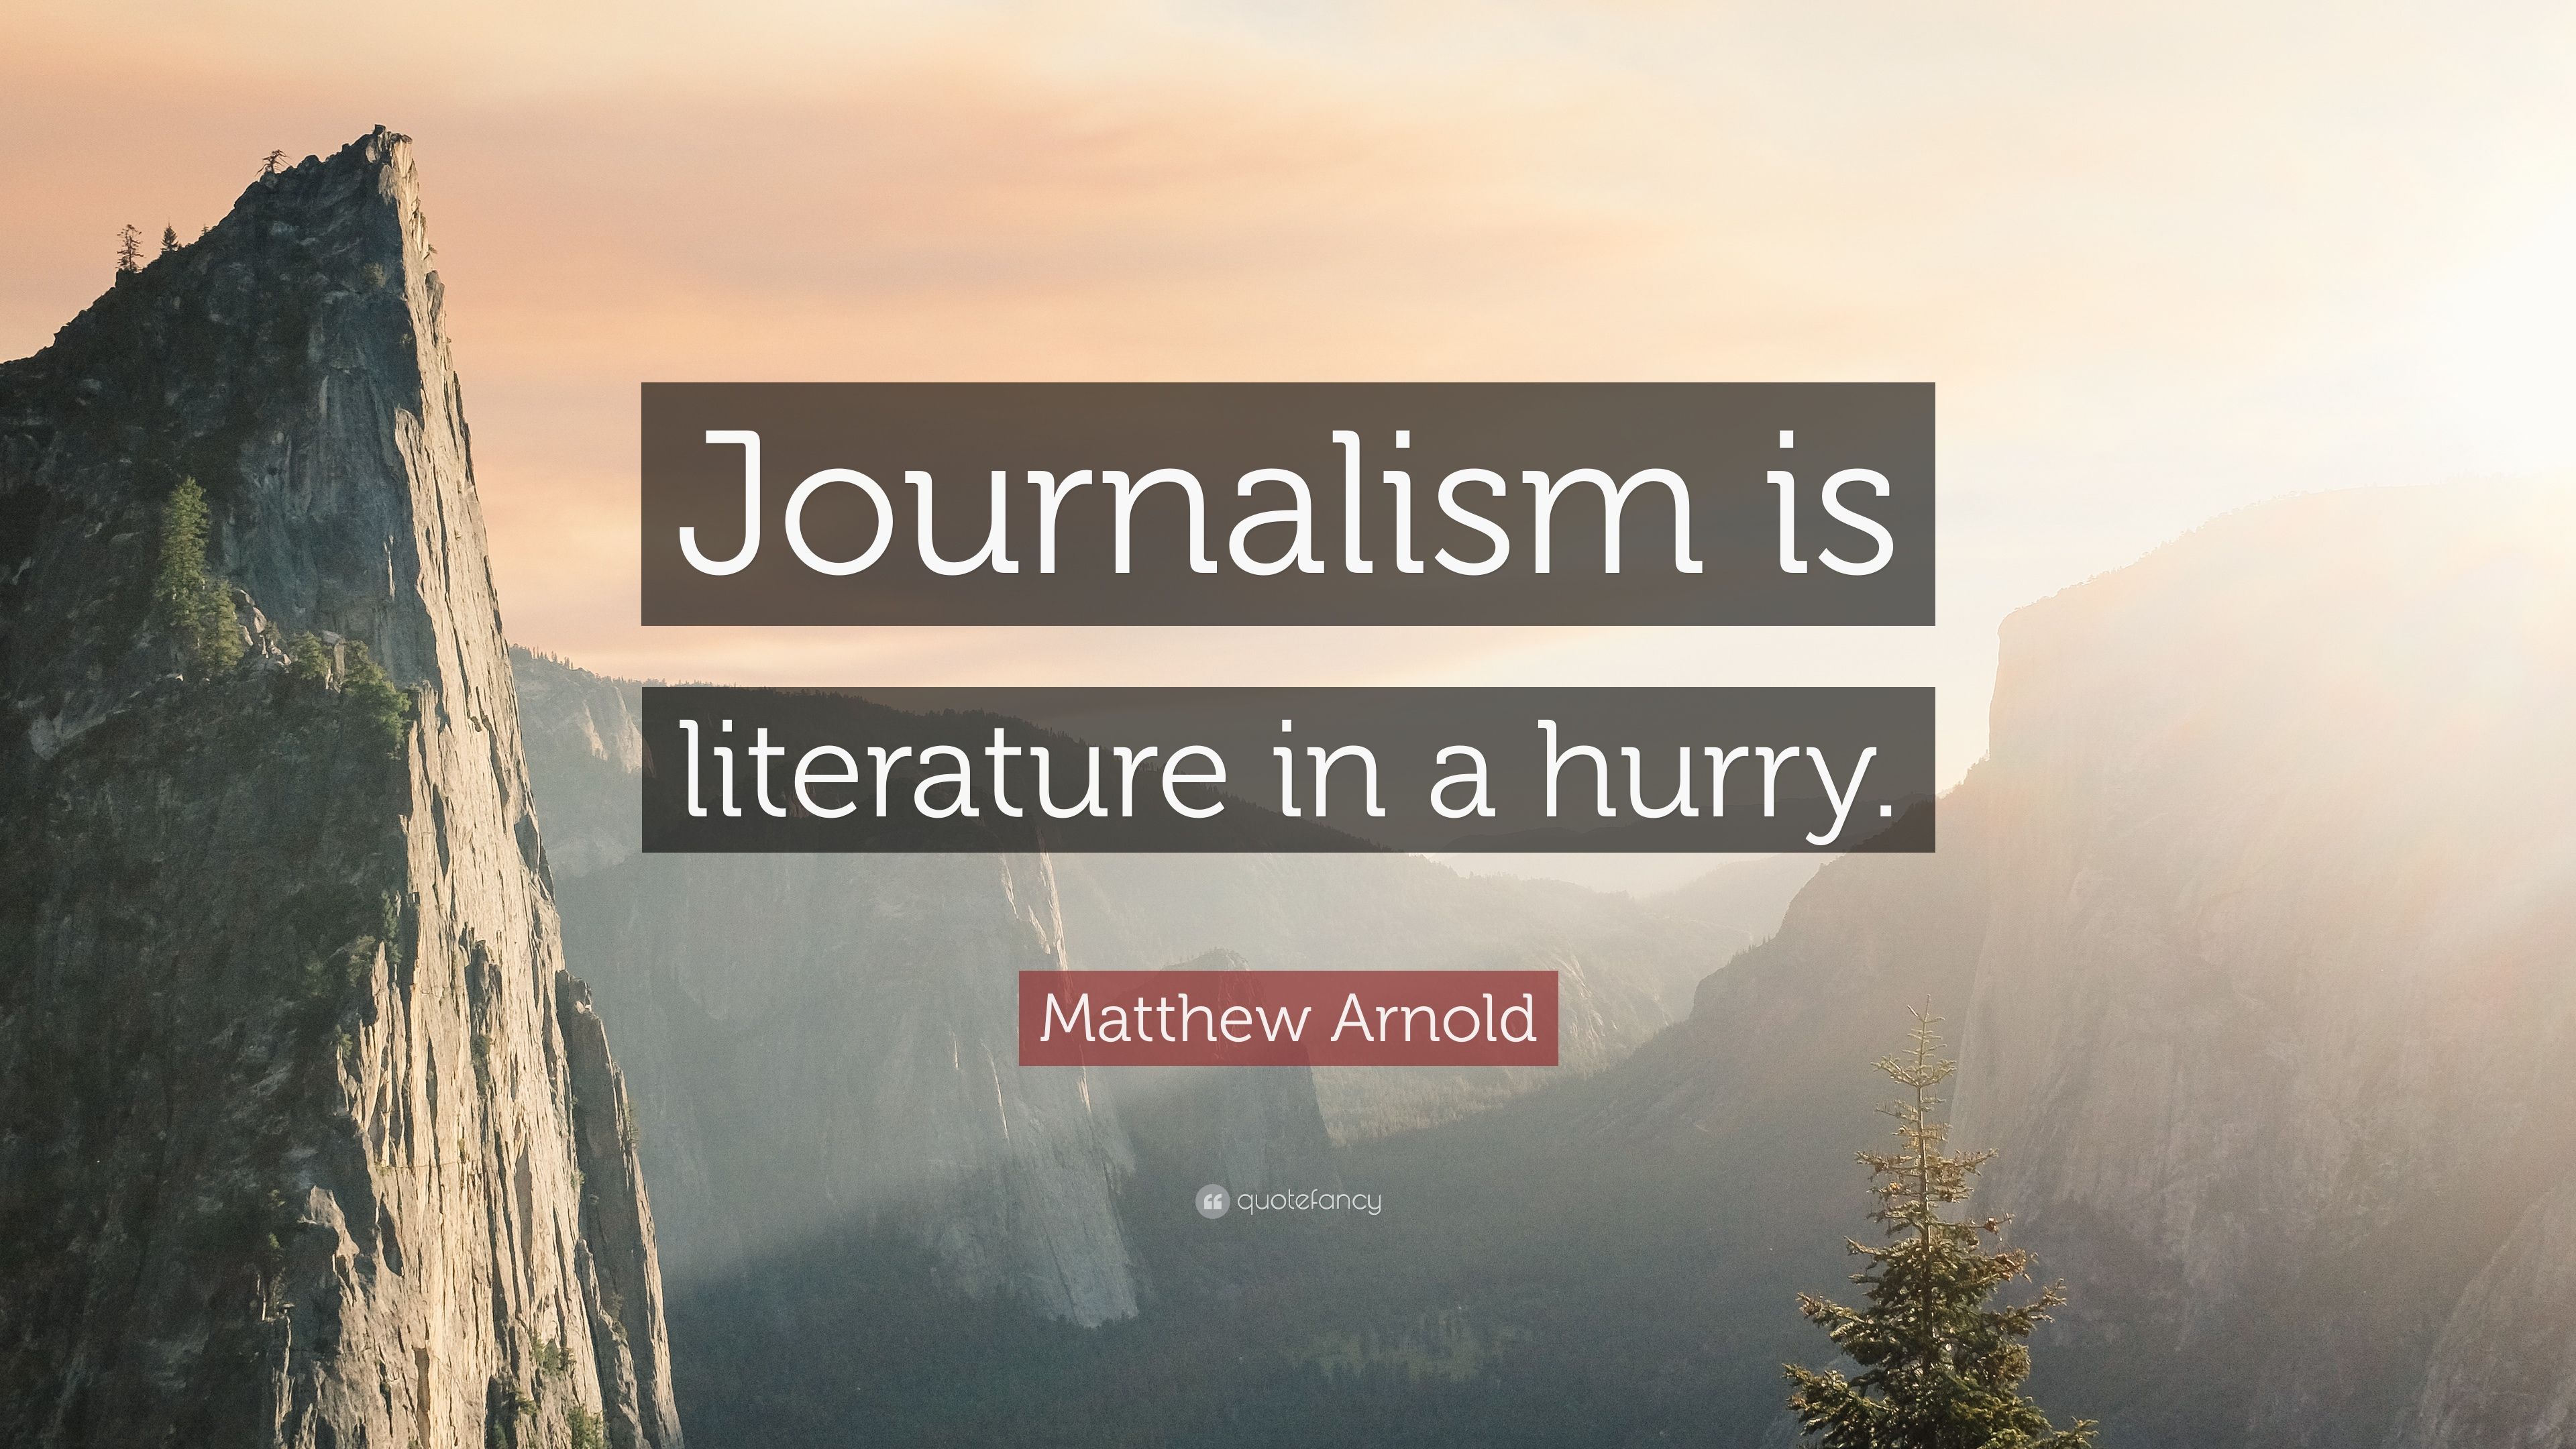 Matthew Arnold Quote: “Journalism is literature in a hurry.” (12 wallpaper)